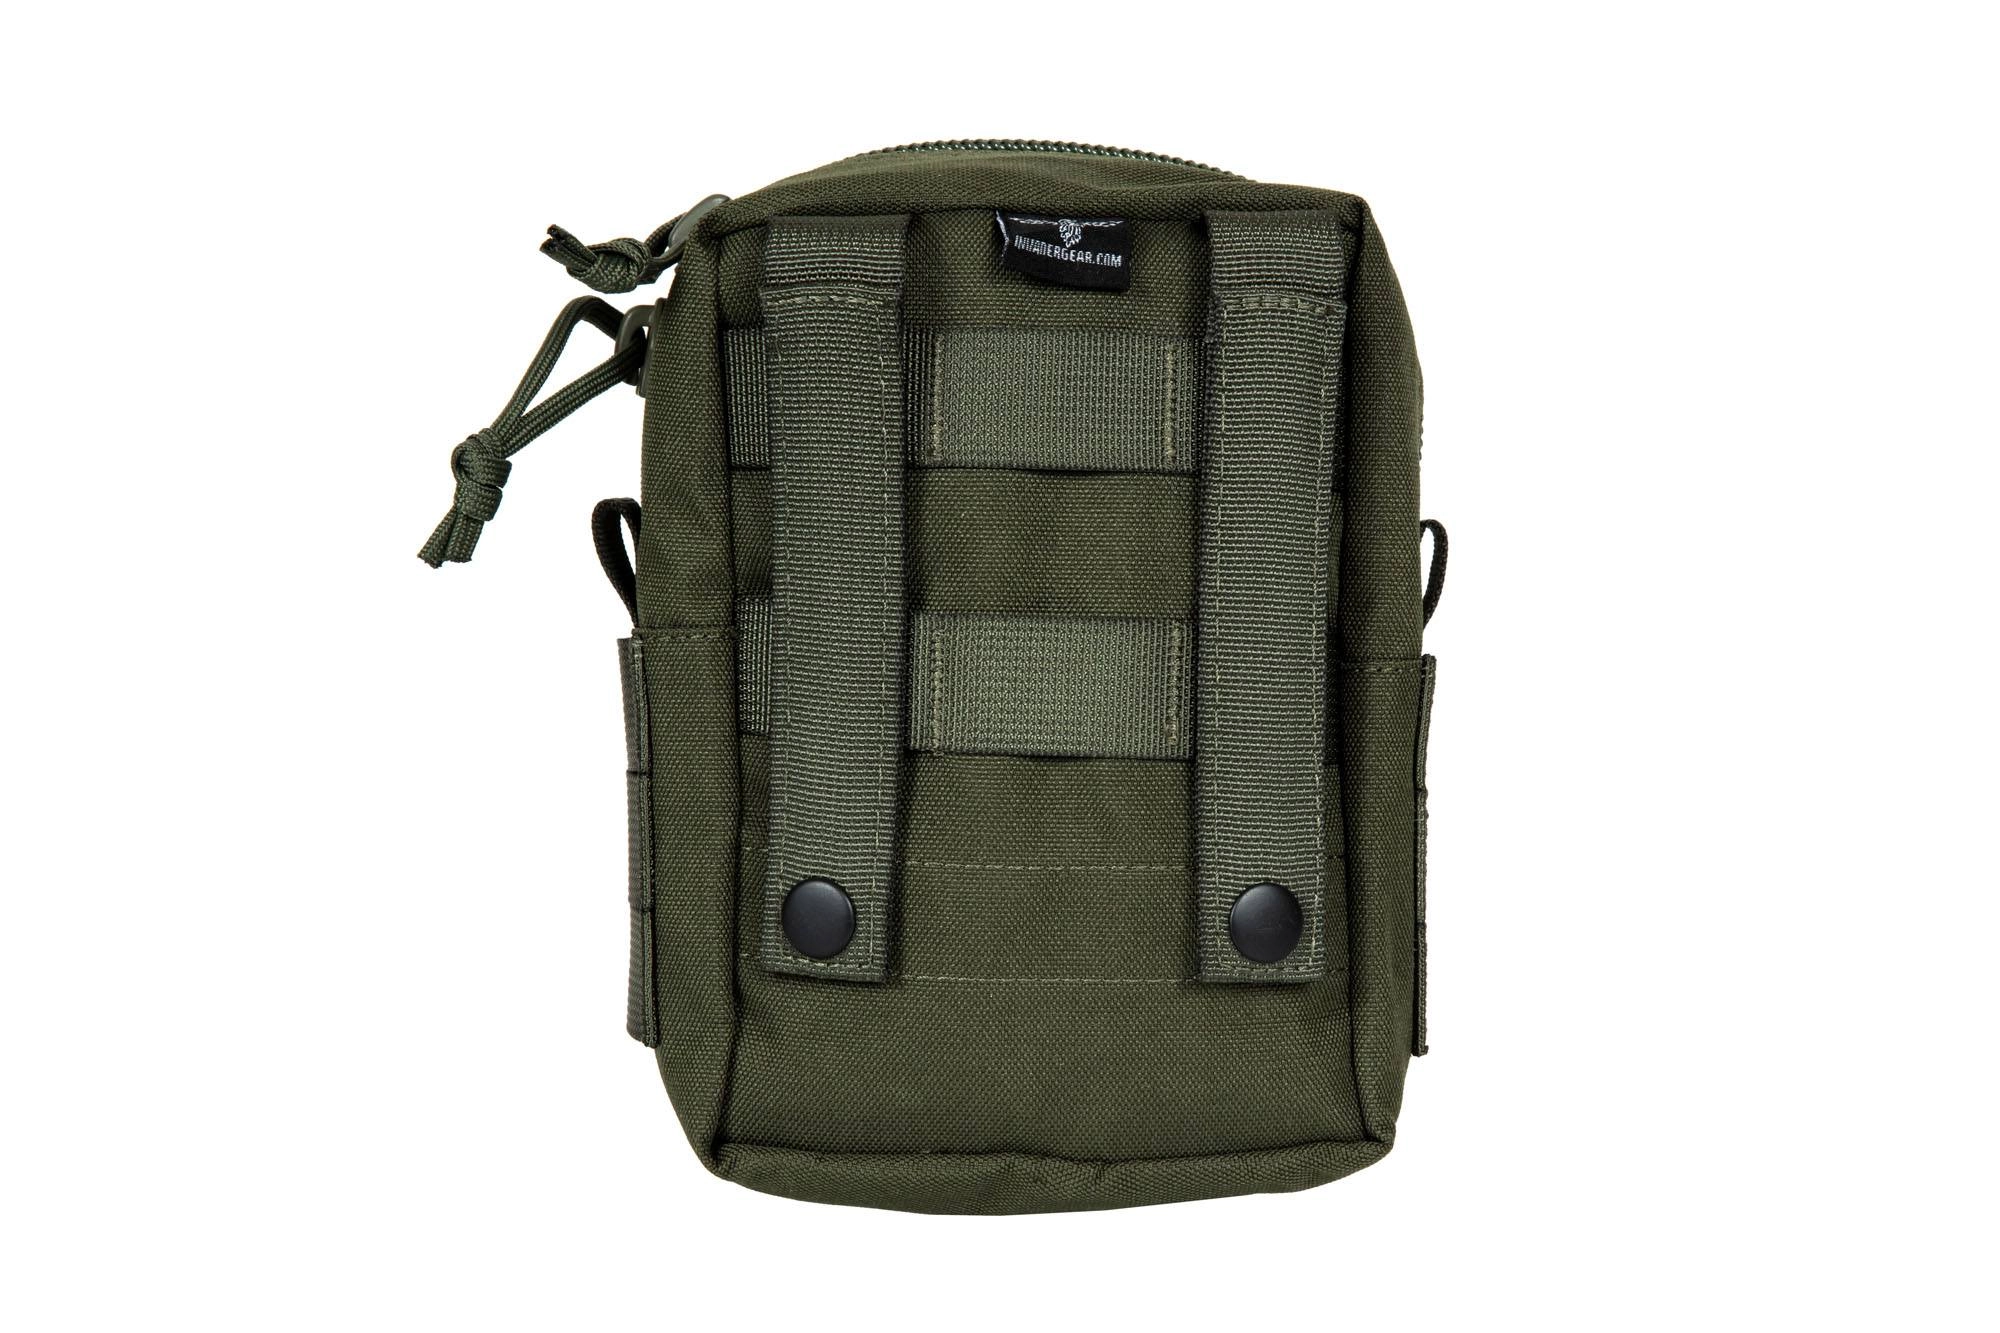 Medium MOLLE Cargo Pouch - Olive Drab